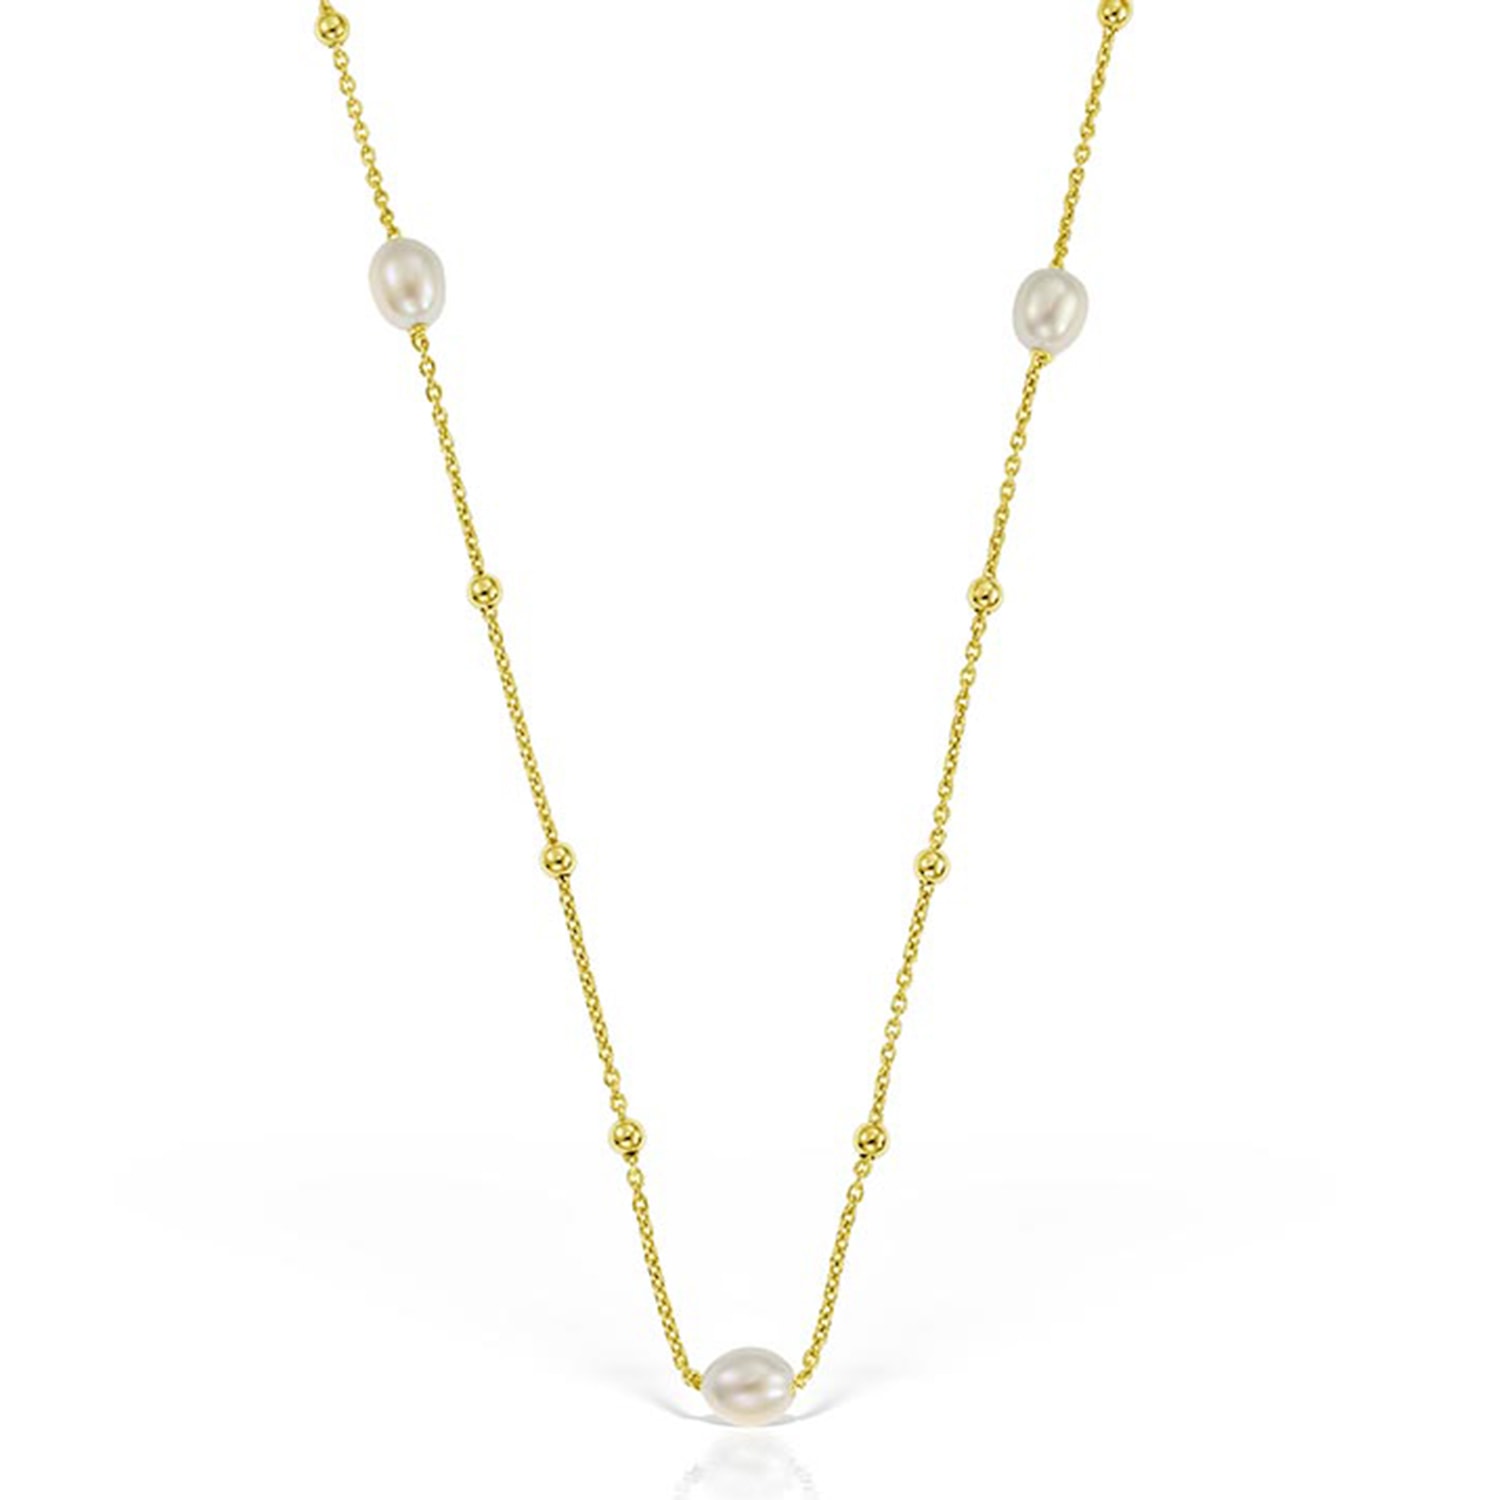 Obsidian Women's Gold / White The Pearl Connection Necklace, Gold Vermeil